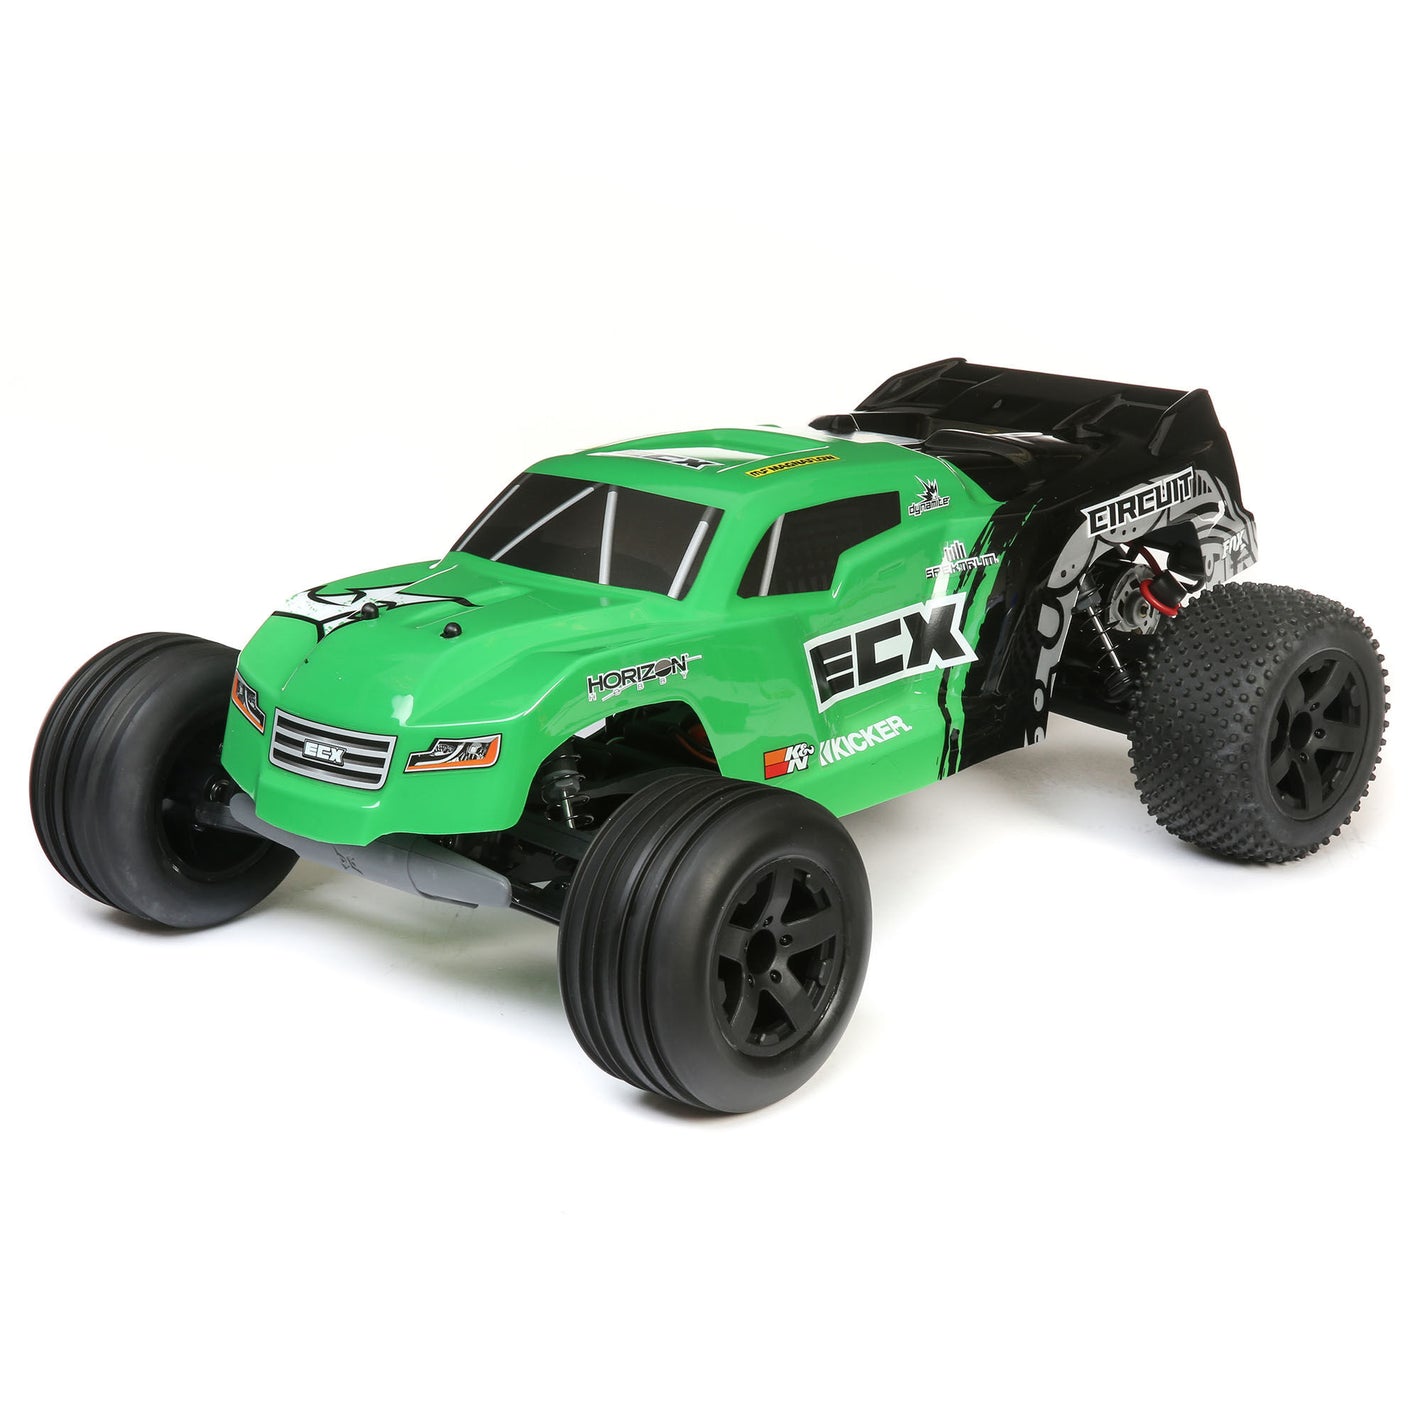 *DISCONTINUED* 1/10 Circuit 2WD Stadium Truck Brushed RTR, Green, ECX03430T2